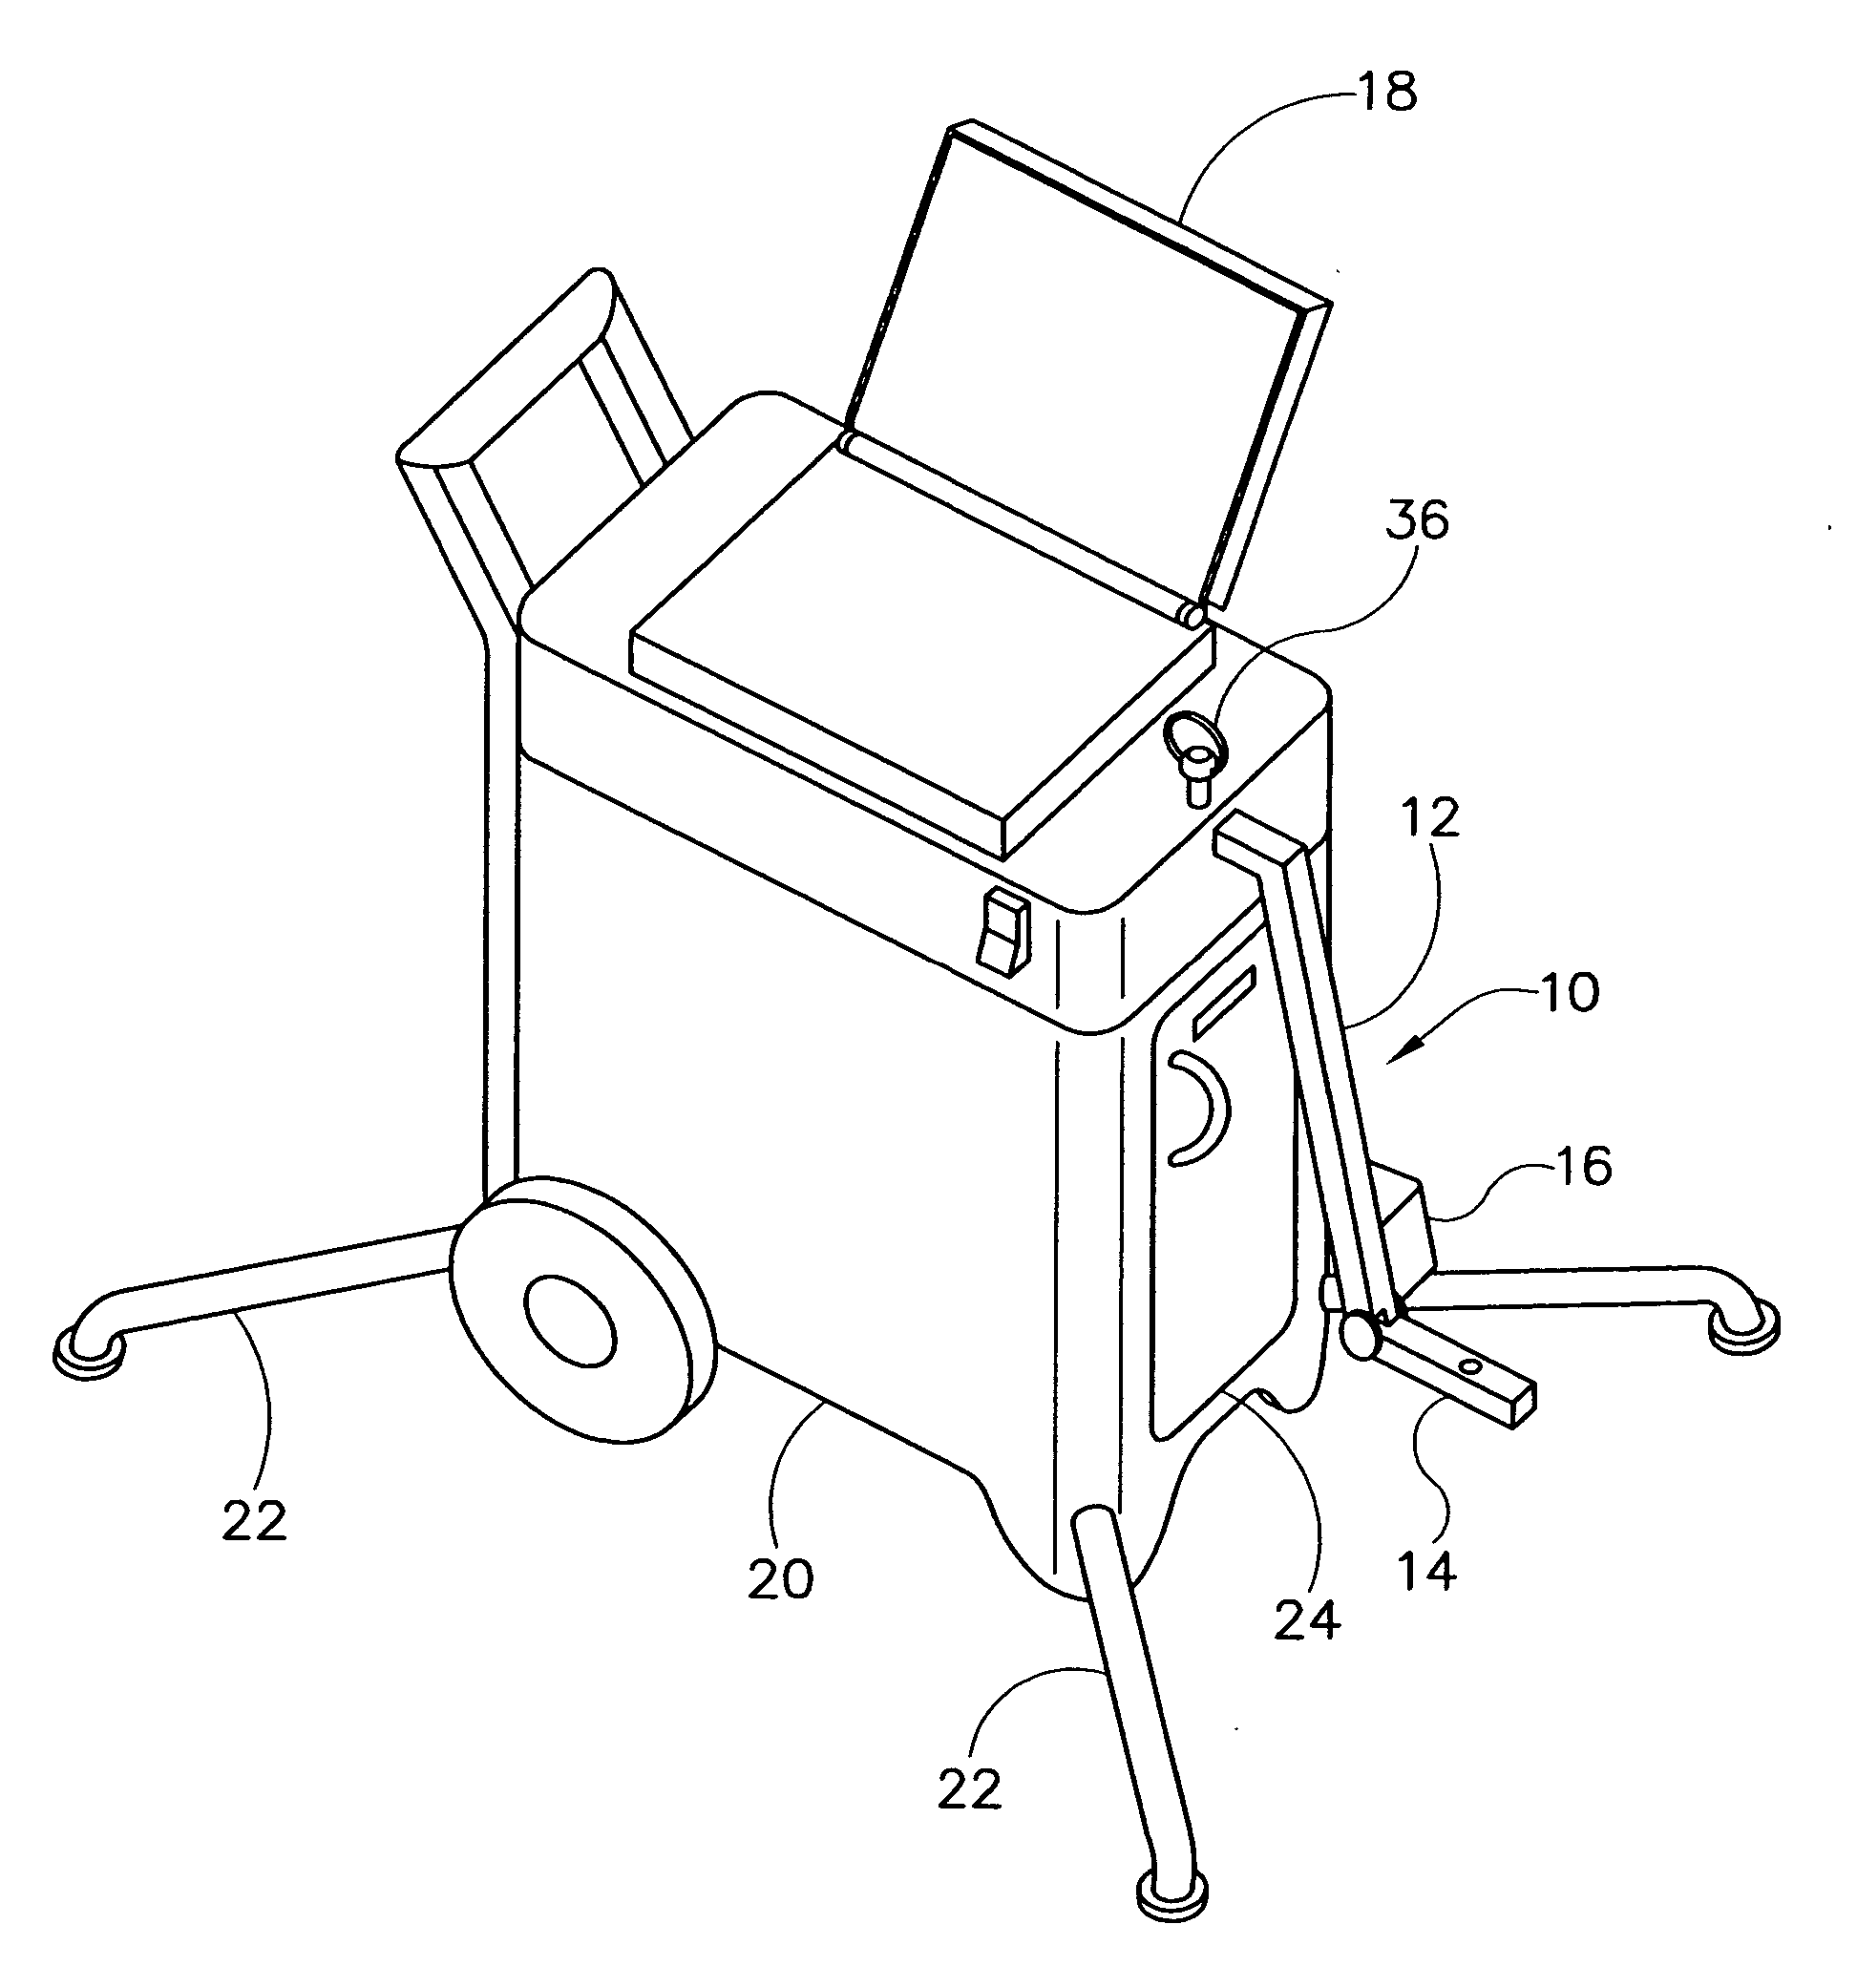 Method and apparatus for resistive characteristic assessment